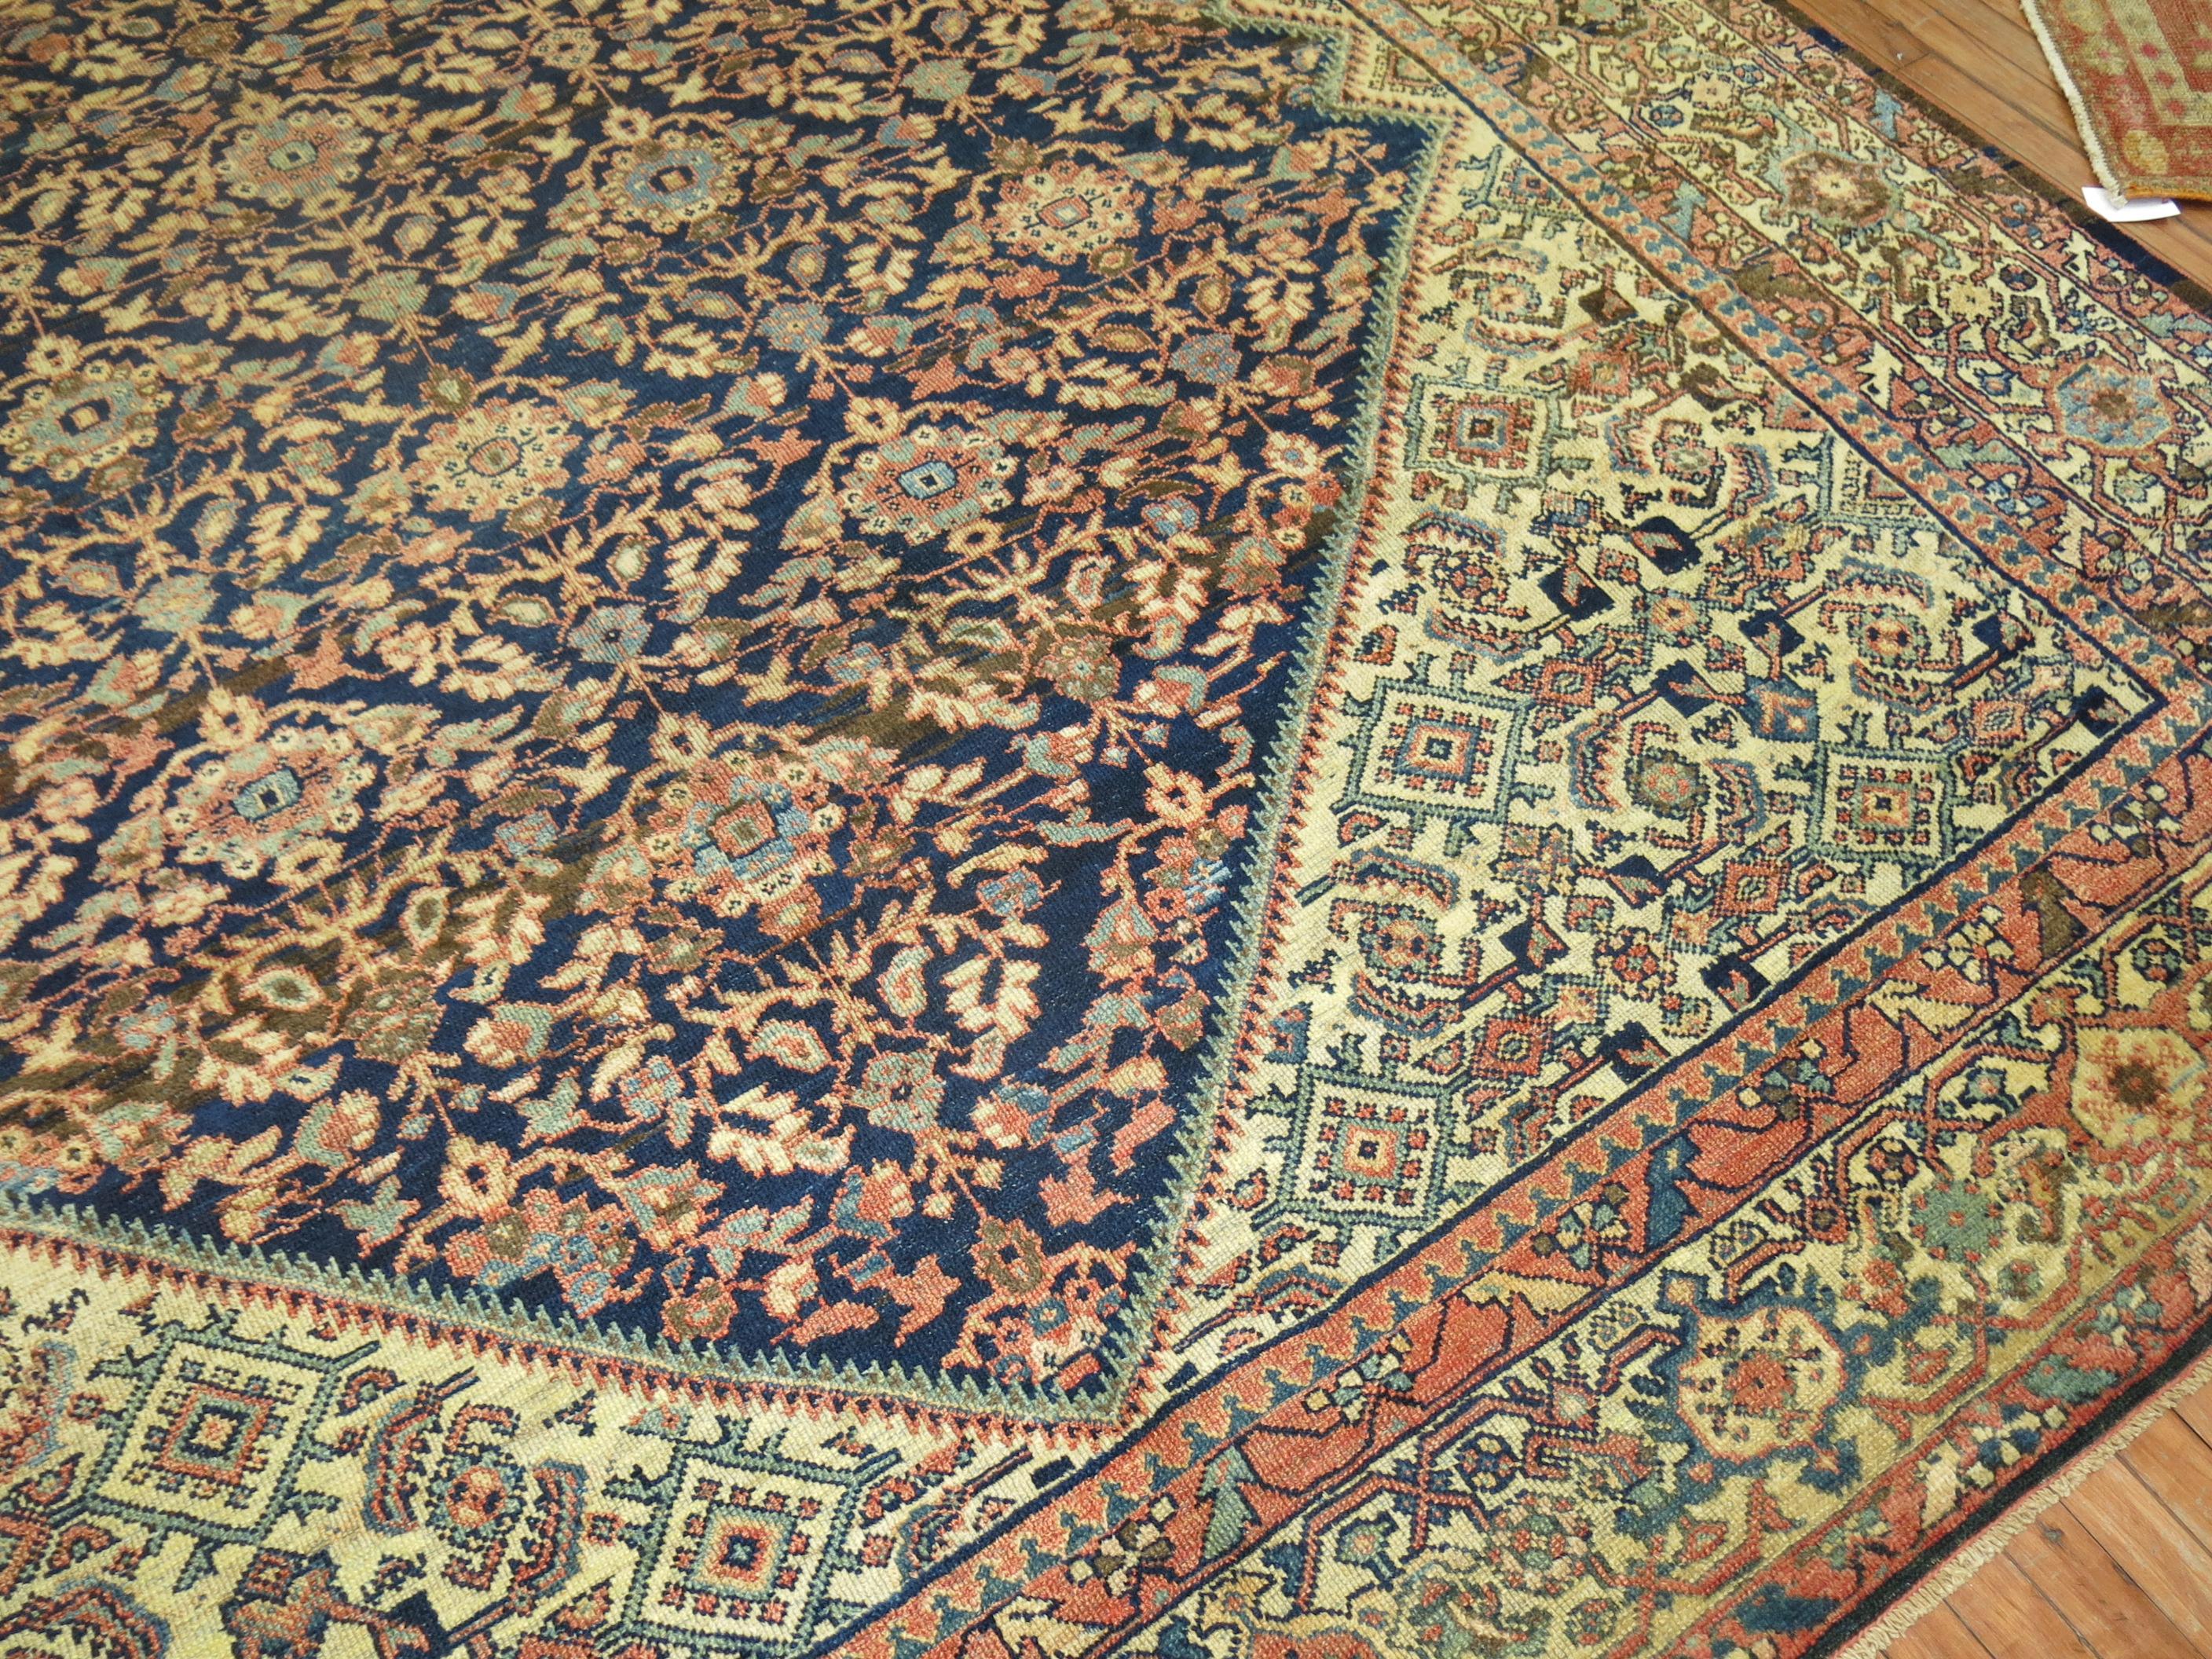 An authentic handmade one-of-a-kind Persian Mahal Rug from the 1920s

10'2'' x 14'